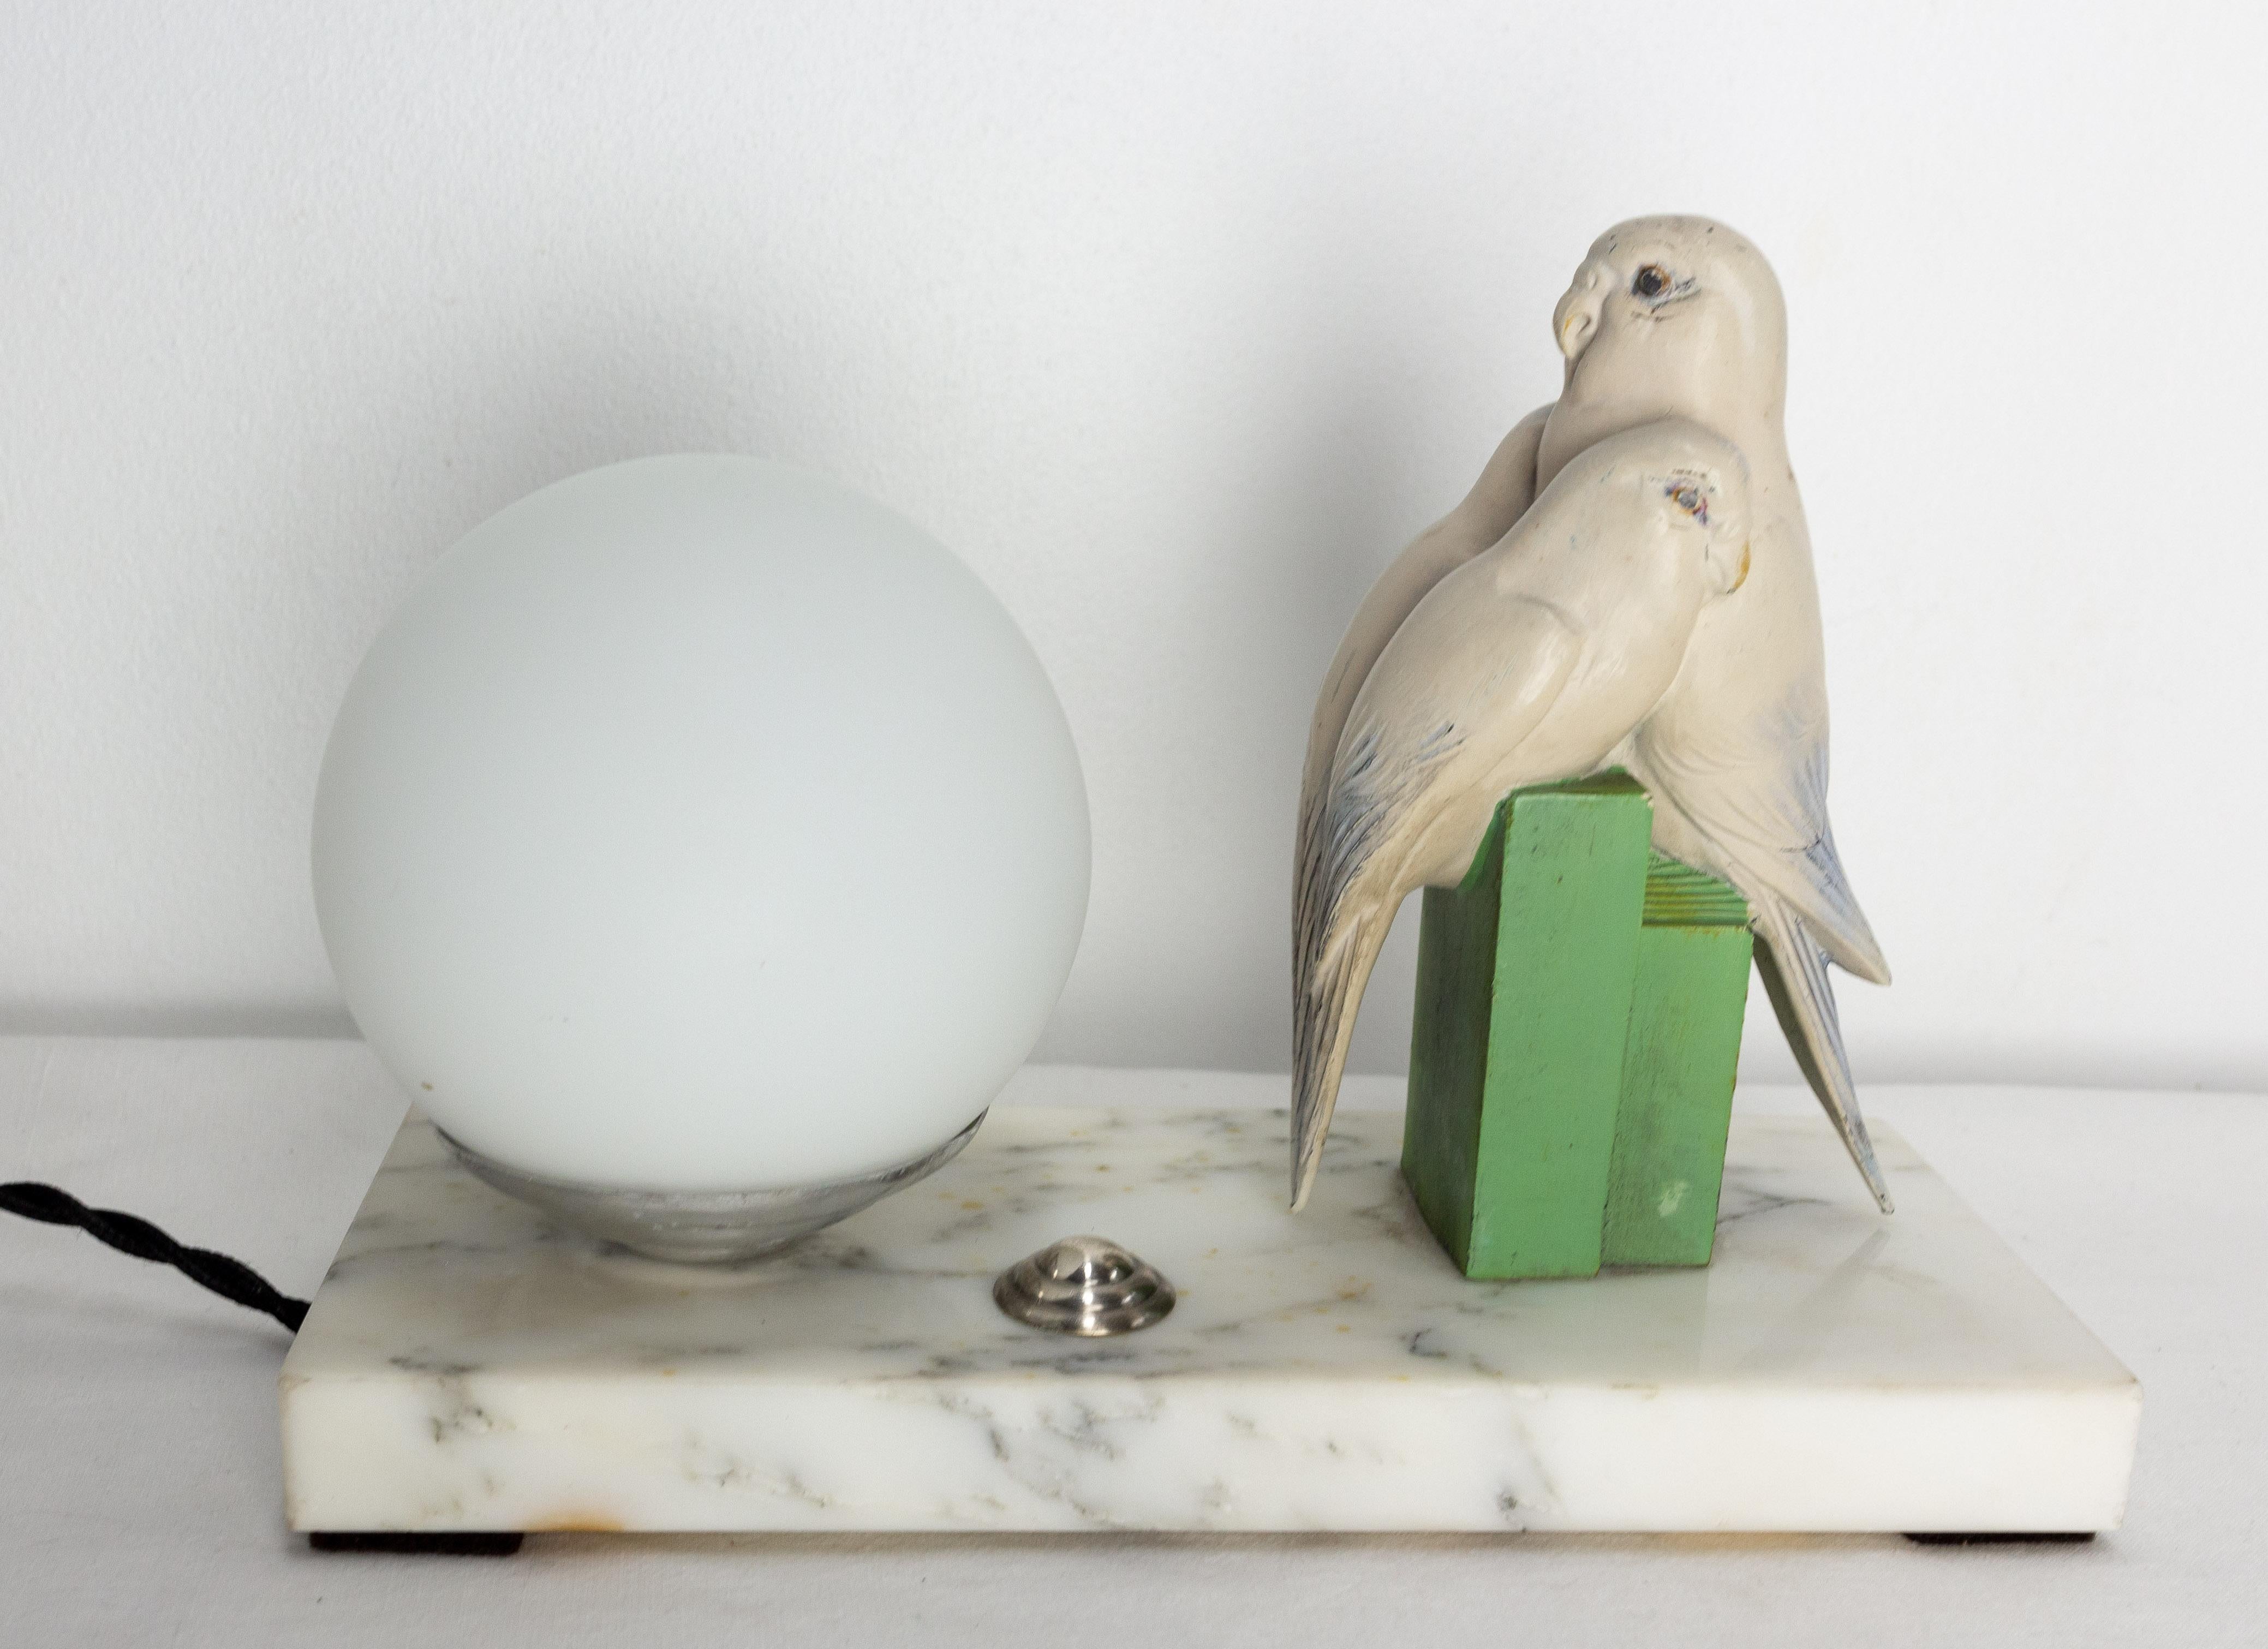 Art Déco table lamp decorated with a parakeets trio. An adult and two young o
Chrome, glass globe, marble and painted spelter.
French circa 1930.
This can be rewired to USA or EU and UK standards.
Good condition with marks of age on the